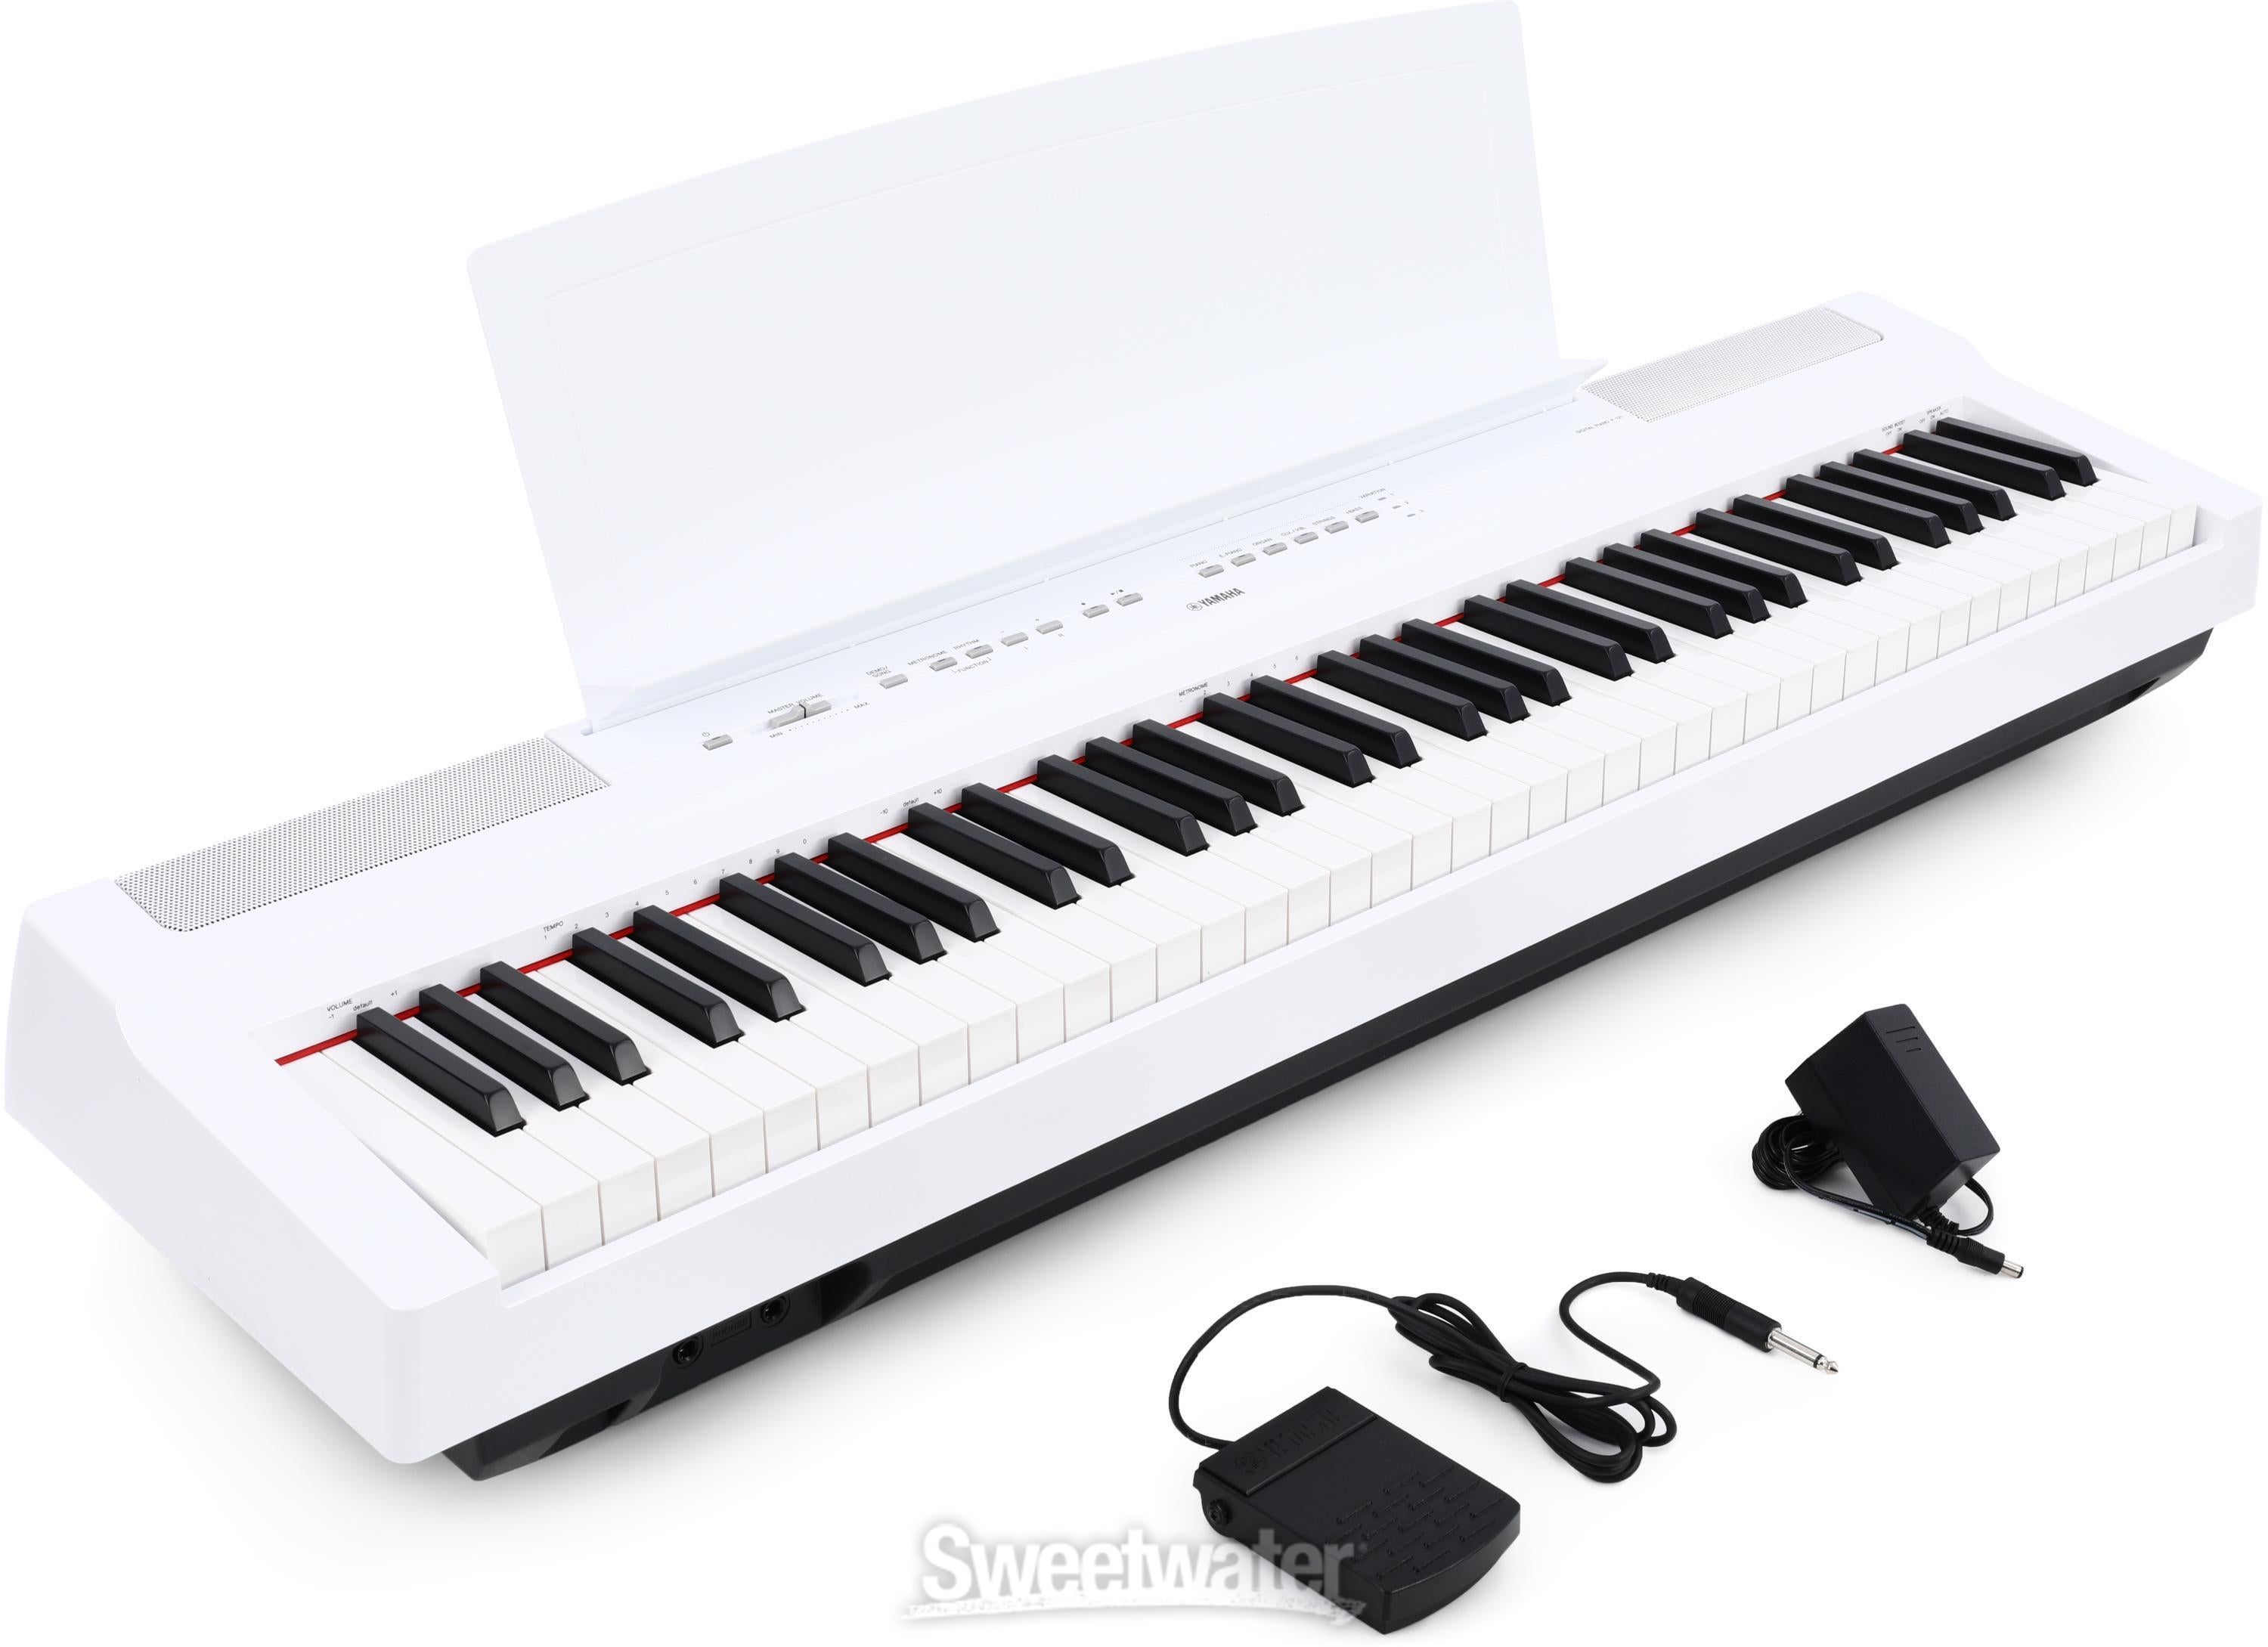 Yamaha P-121 73-key Digital Piano with Speakers - White | Sweetwater